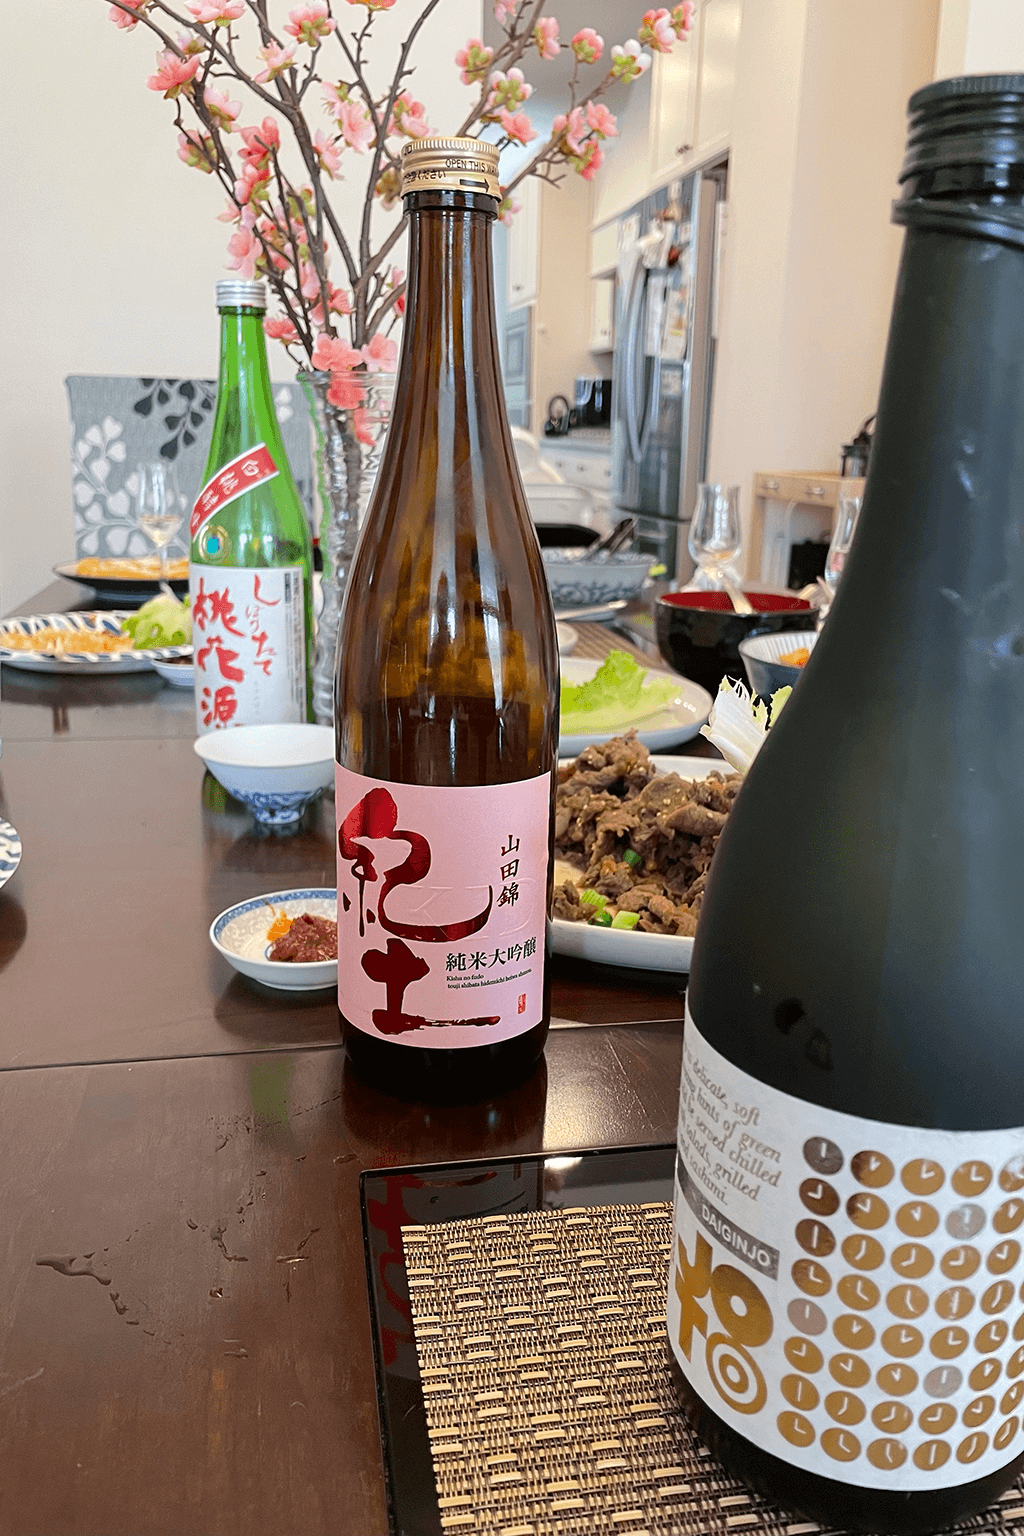 Tasting a few different sake on the same occasion is a great way to begin comparing and learning about the nuances between aromas and flavors.